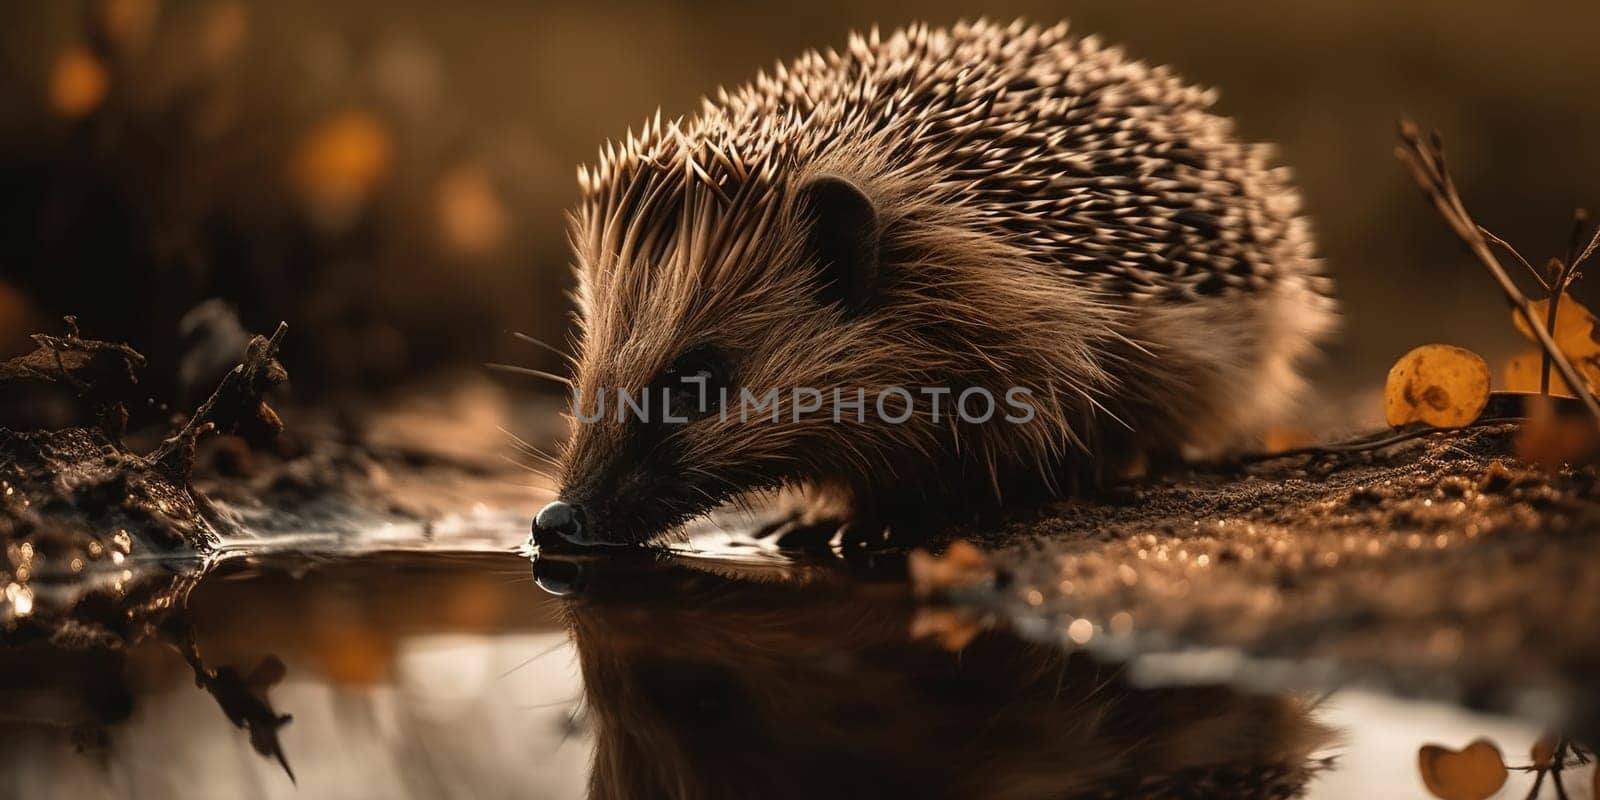 Wild Hedgehog Drinks Water From The Puddle In The Forest by tan4ikk1